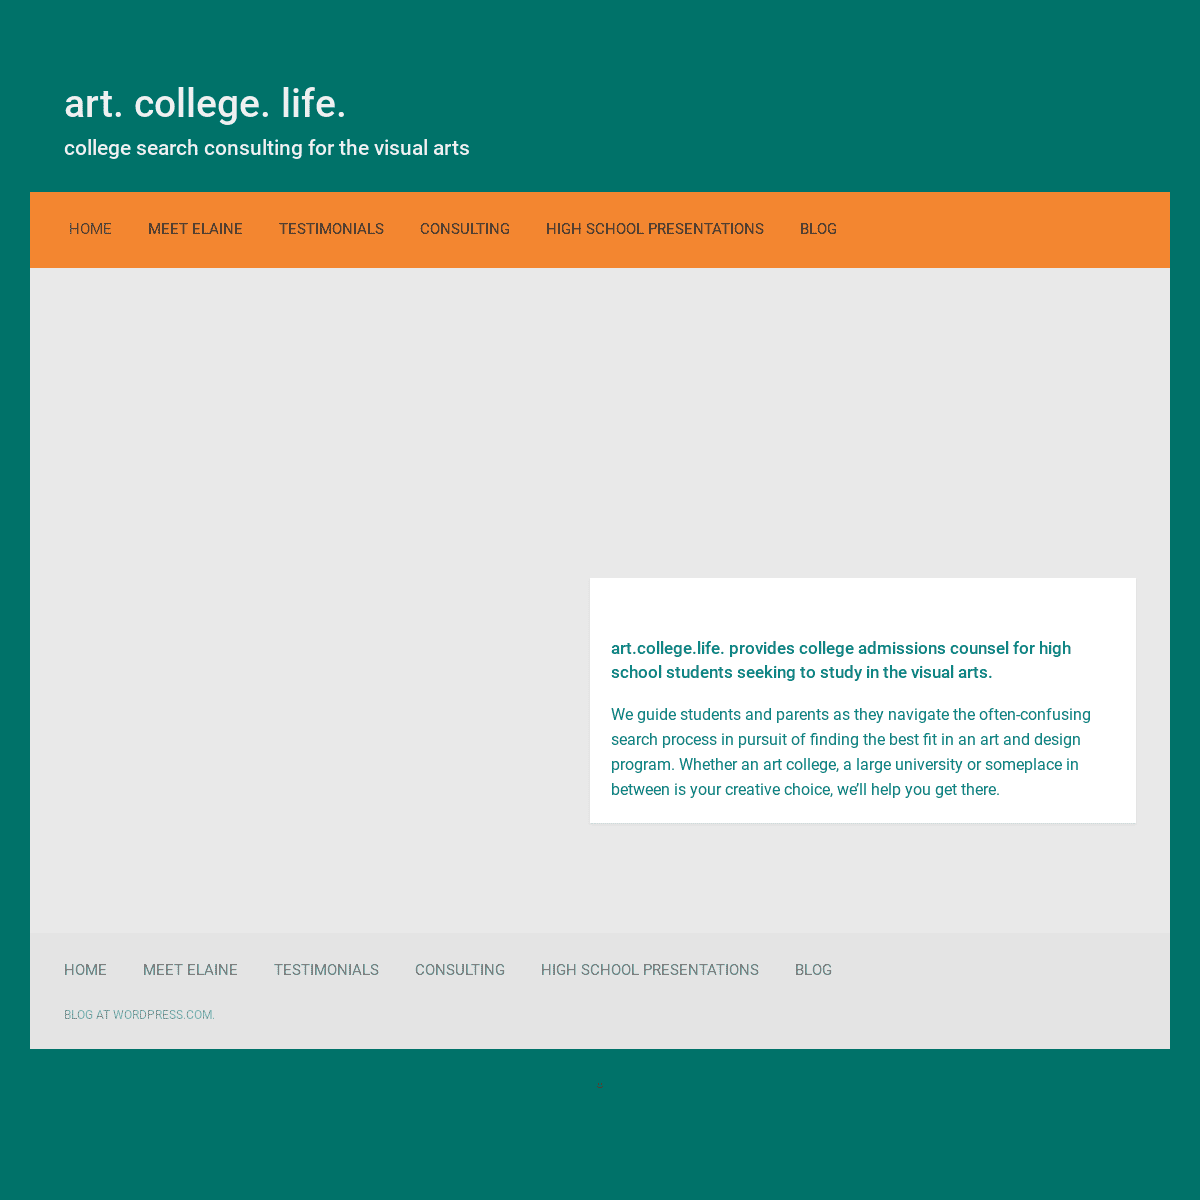 A complete backup of https://artcollegelife.com